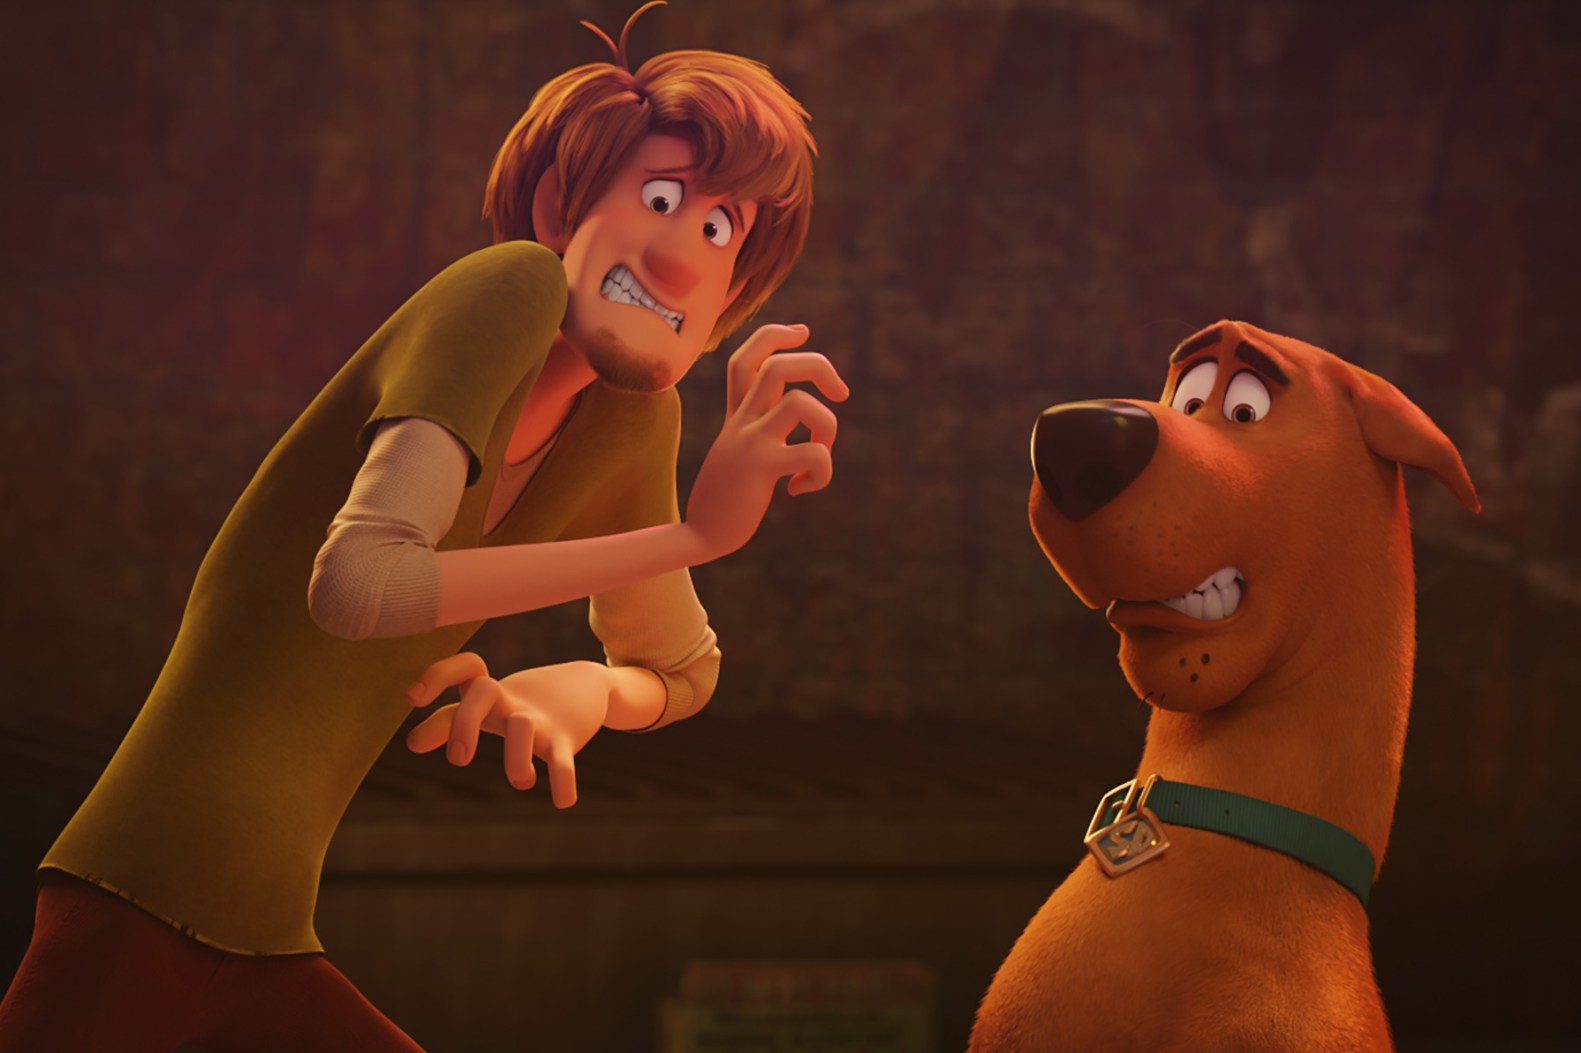 Best of Pics of scooby doo and shaggy